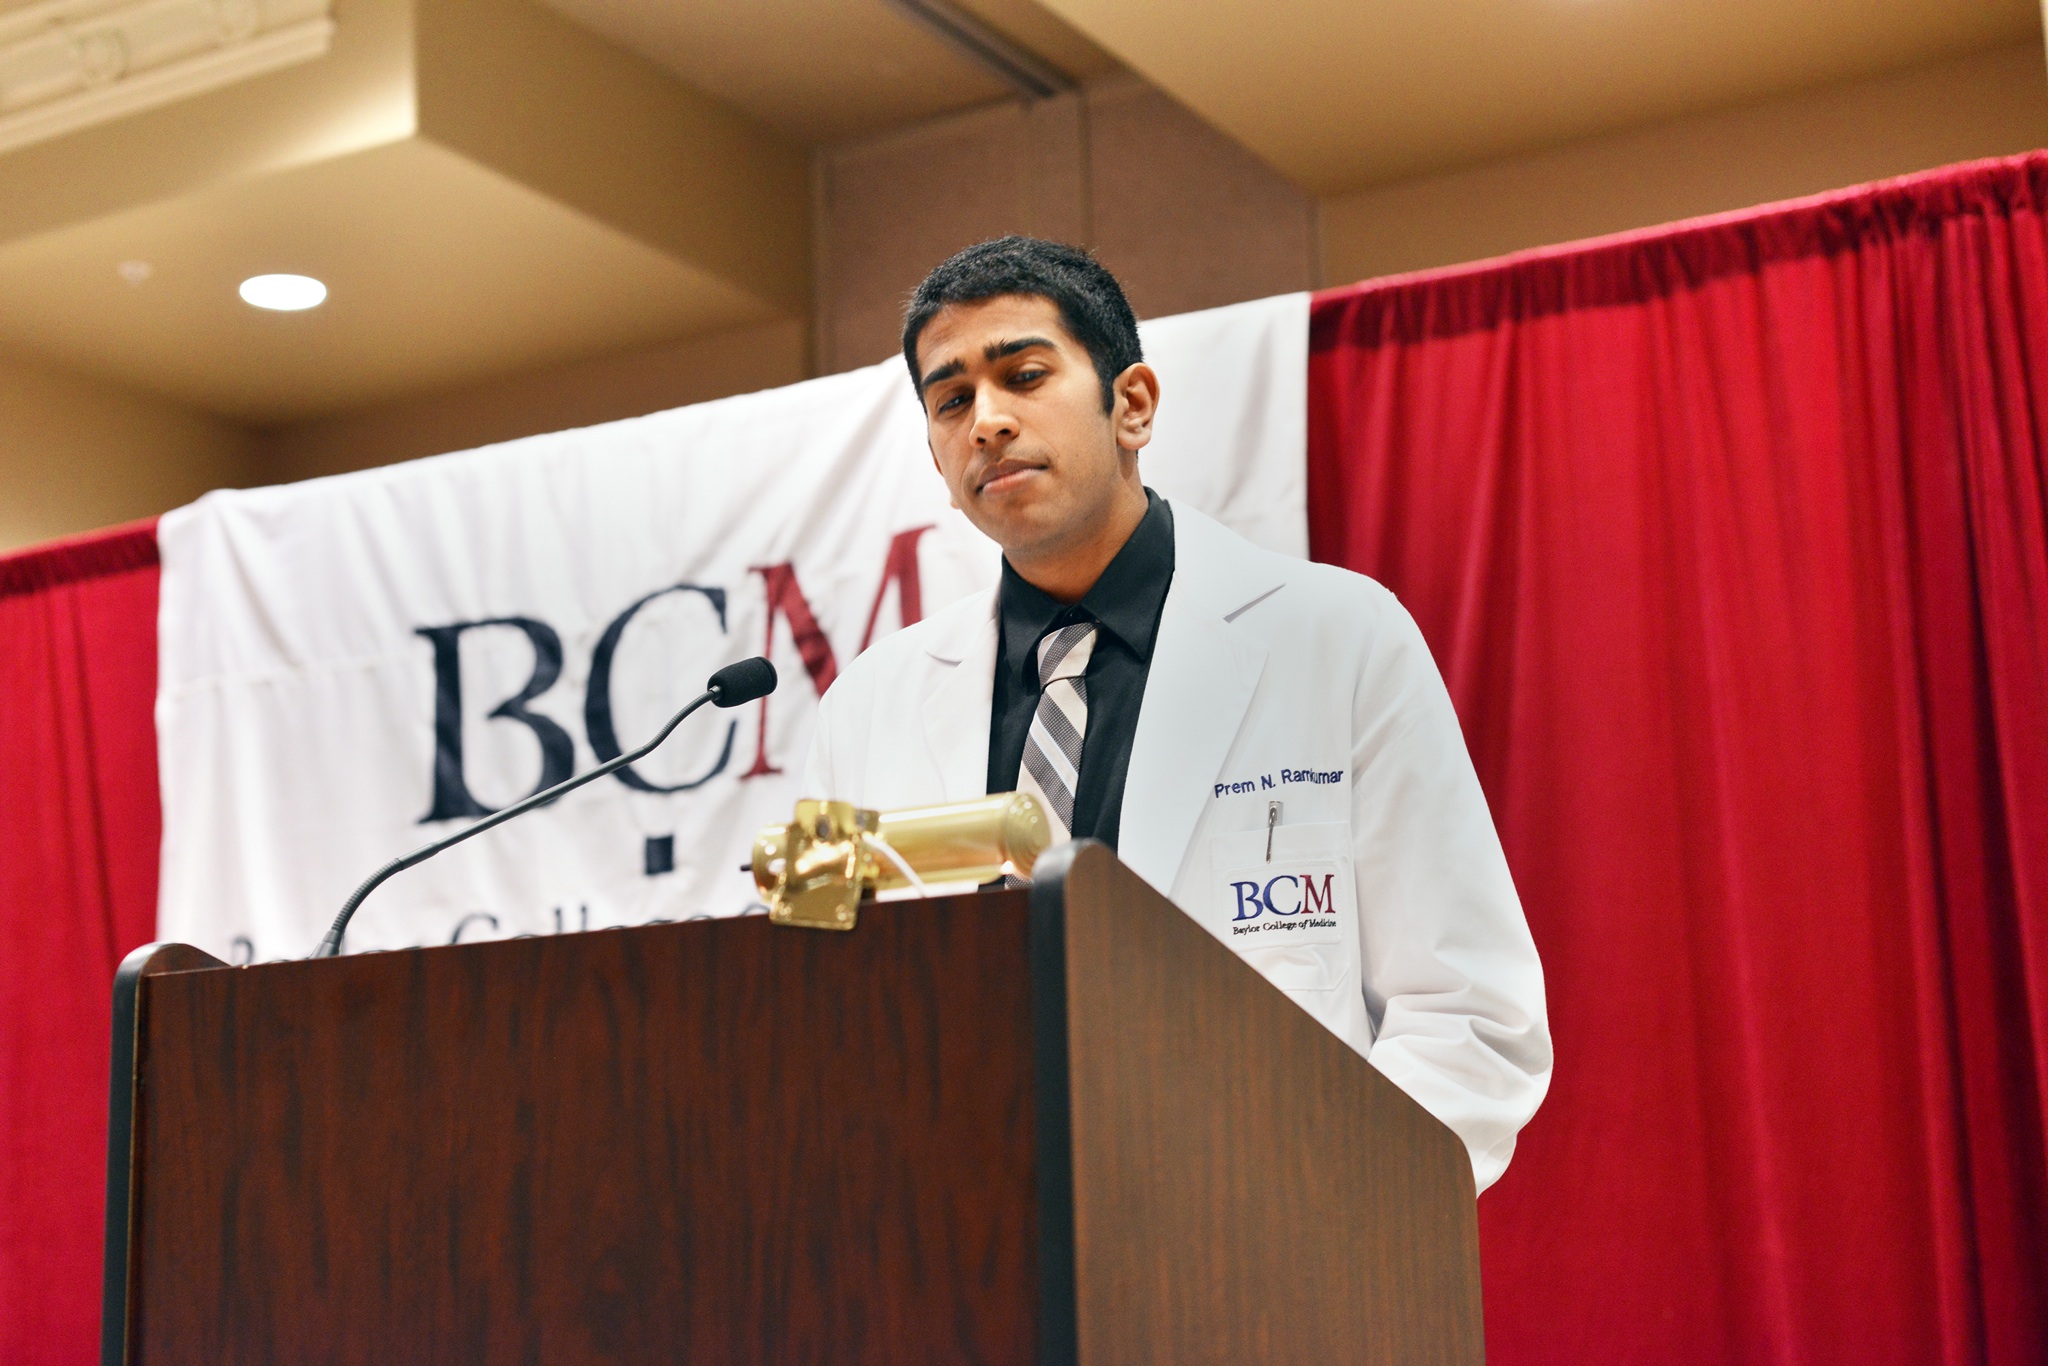 Prem Narayan Ramkumar, currently a third-year student at Baylor College of Medicine, spoke at the 2012 White Coat Ceremony.